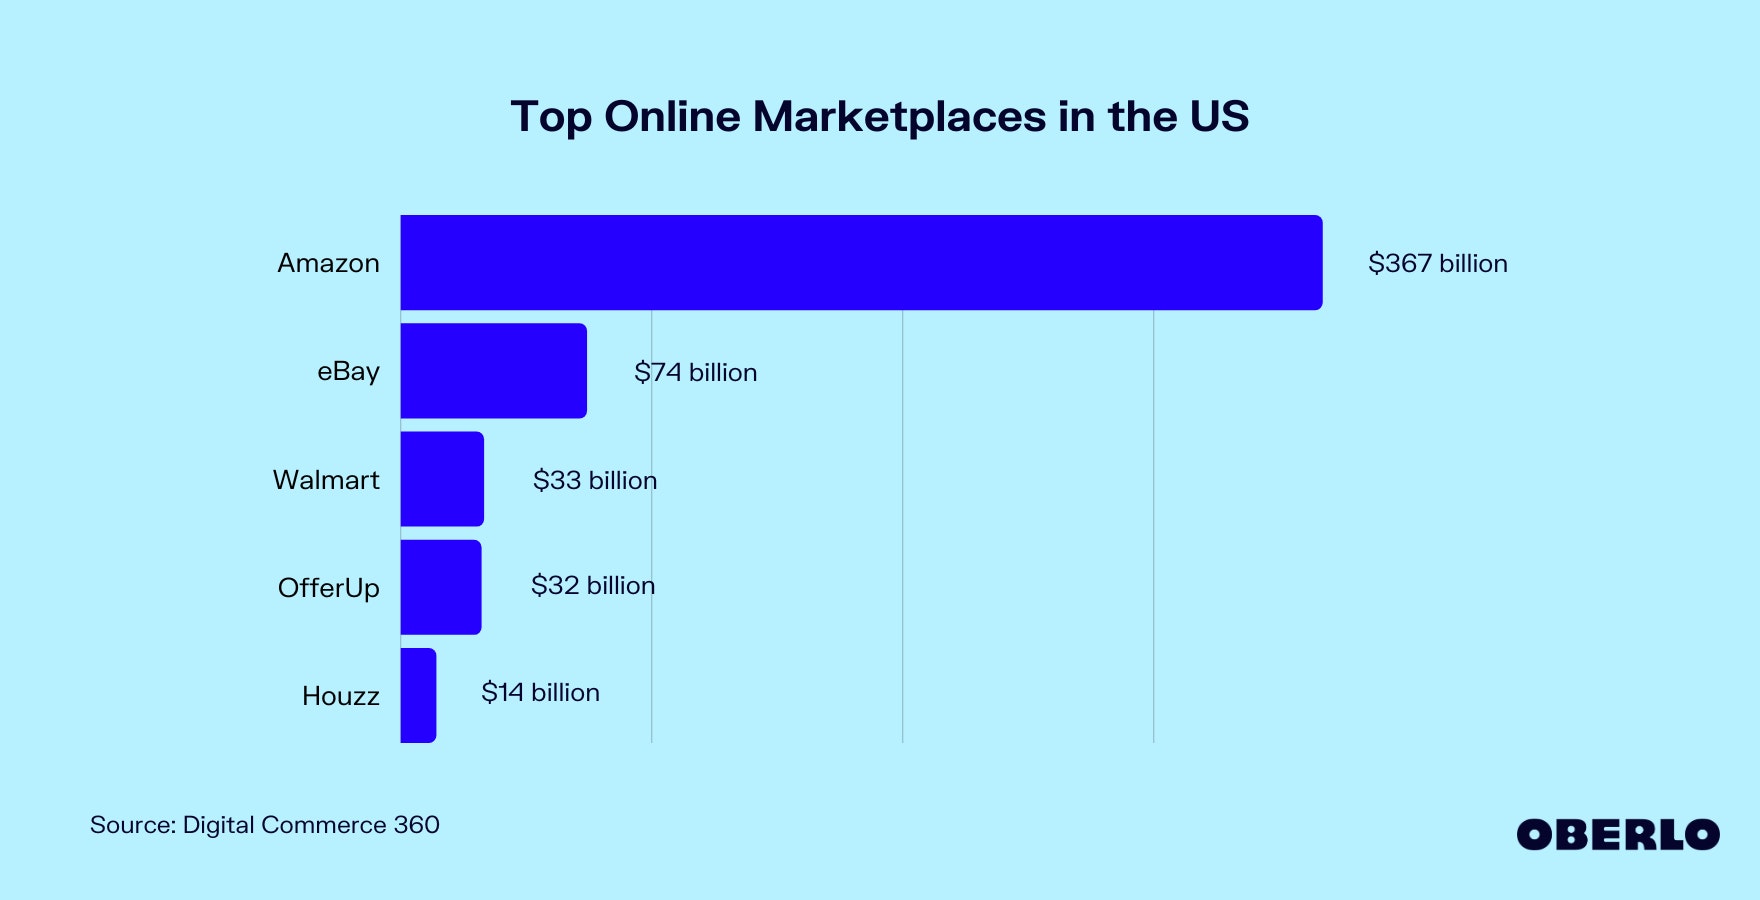 Chart showing the Top Online Marketplaces in the US